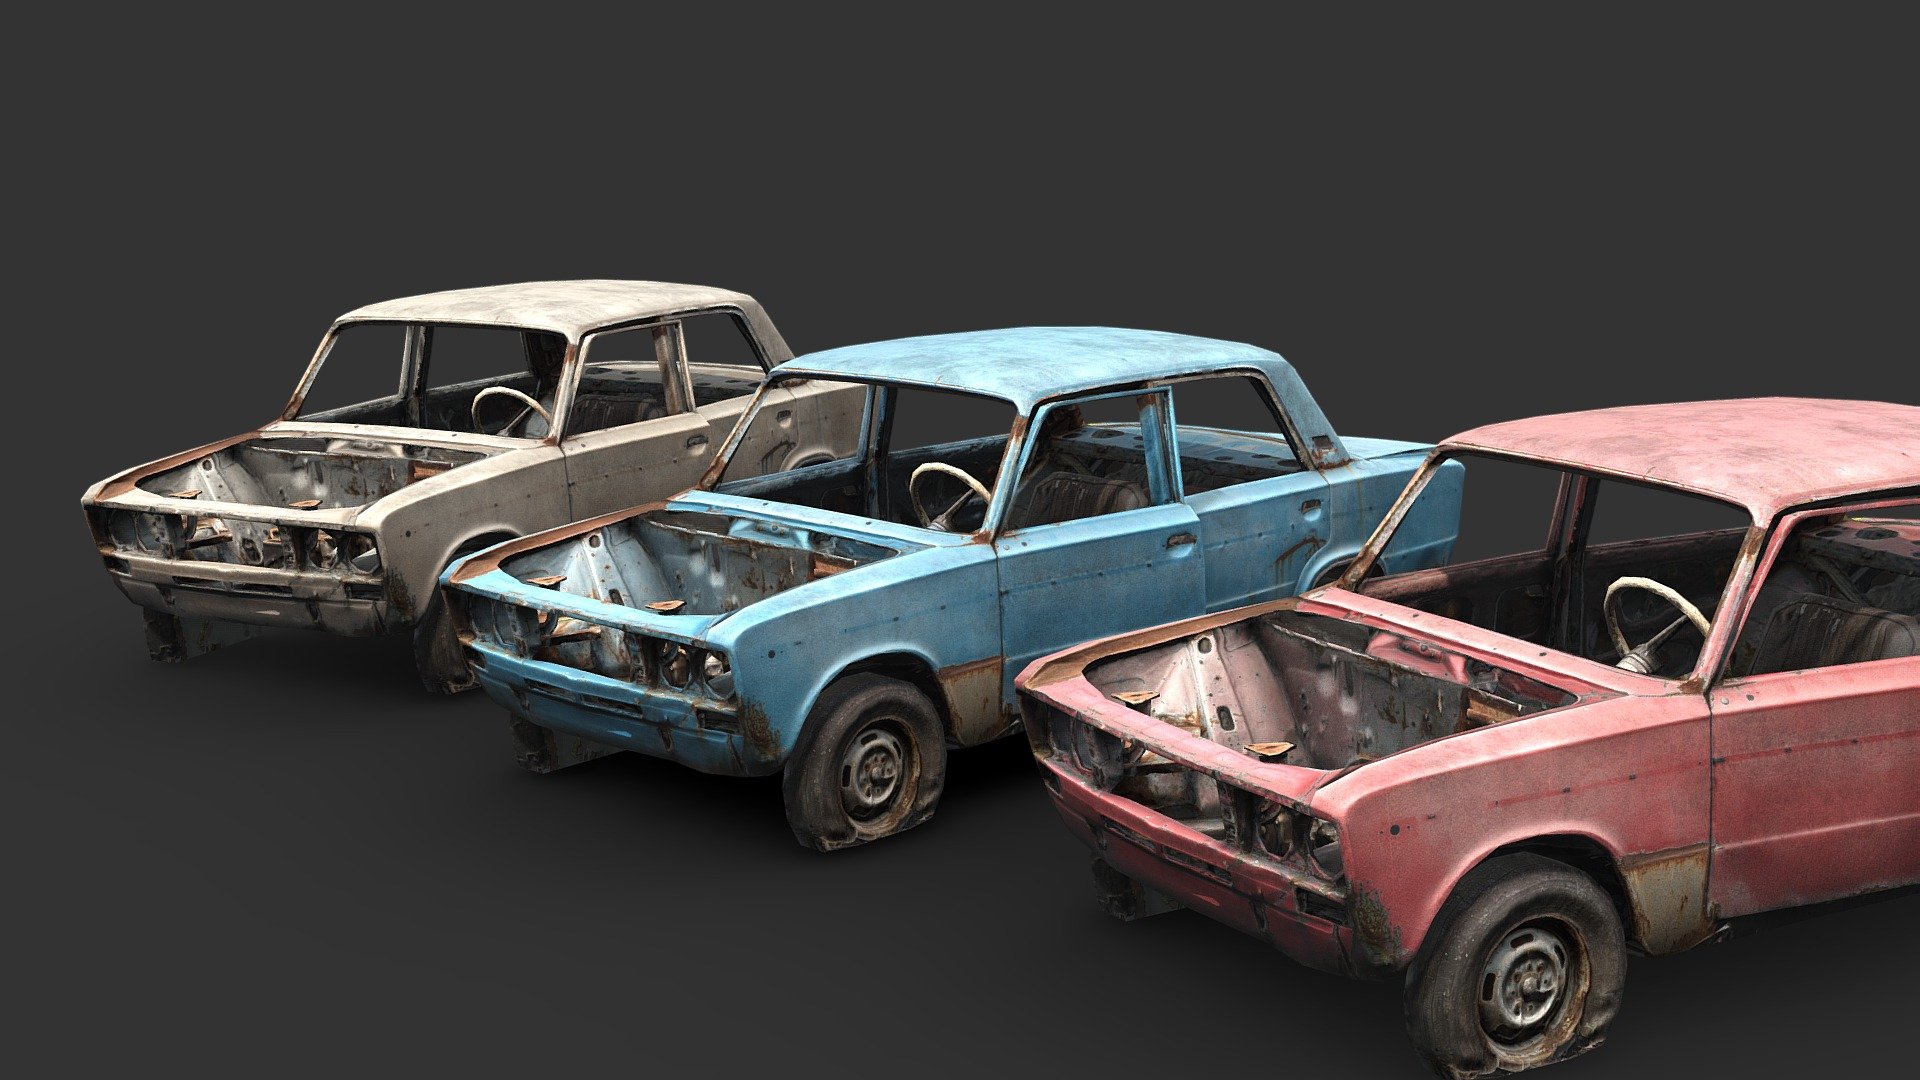 A re-cleanup of my previous retopology of Rudavin's VAZ 2106 scan, I photoshopped the car to be one solid color instead of patched together: https://sketchfab.com/3d-models/vaz-2106-chernobylite-412d2f9b212740c9b4ba8b91aec8579c

Made in Topogun, 3DSMax, and Substance Painter 3d model